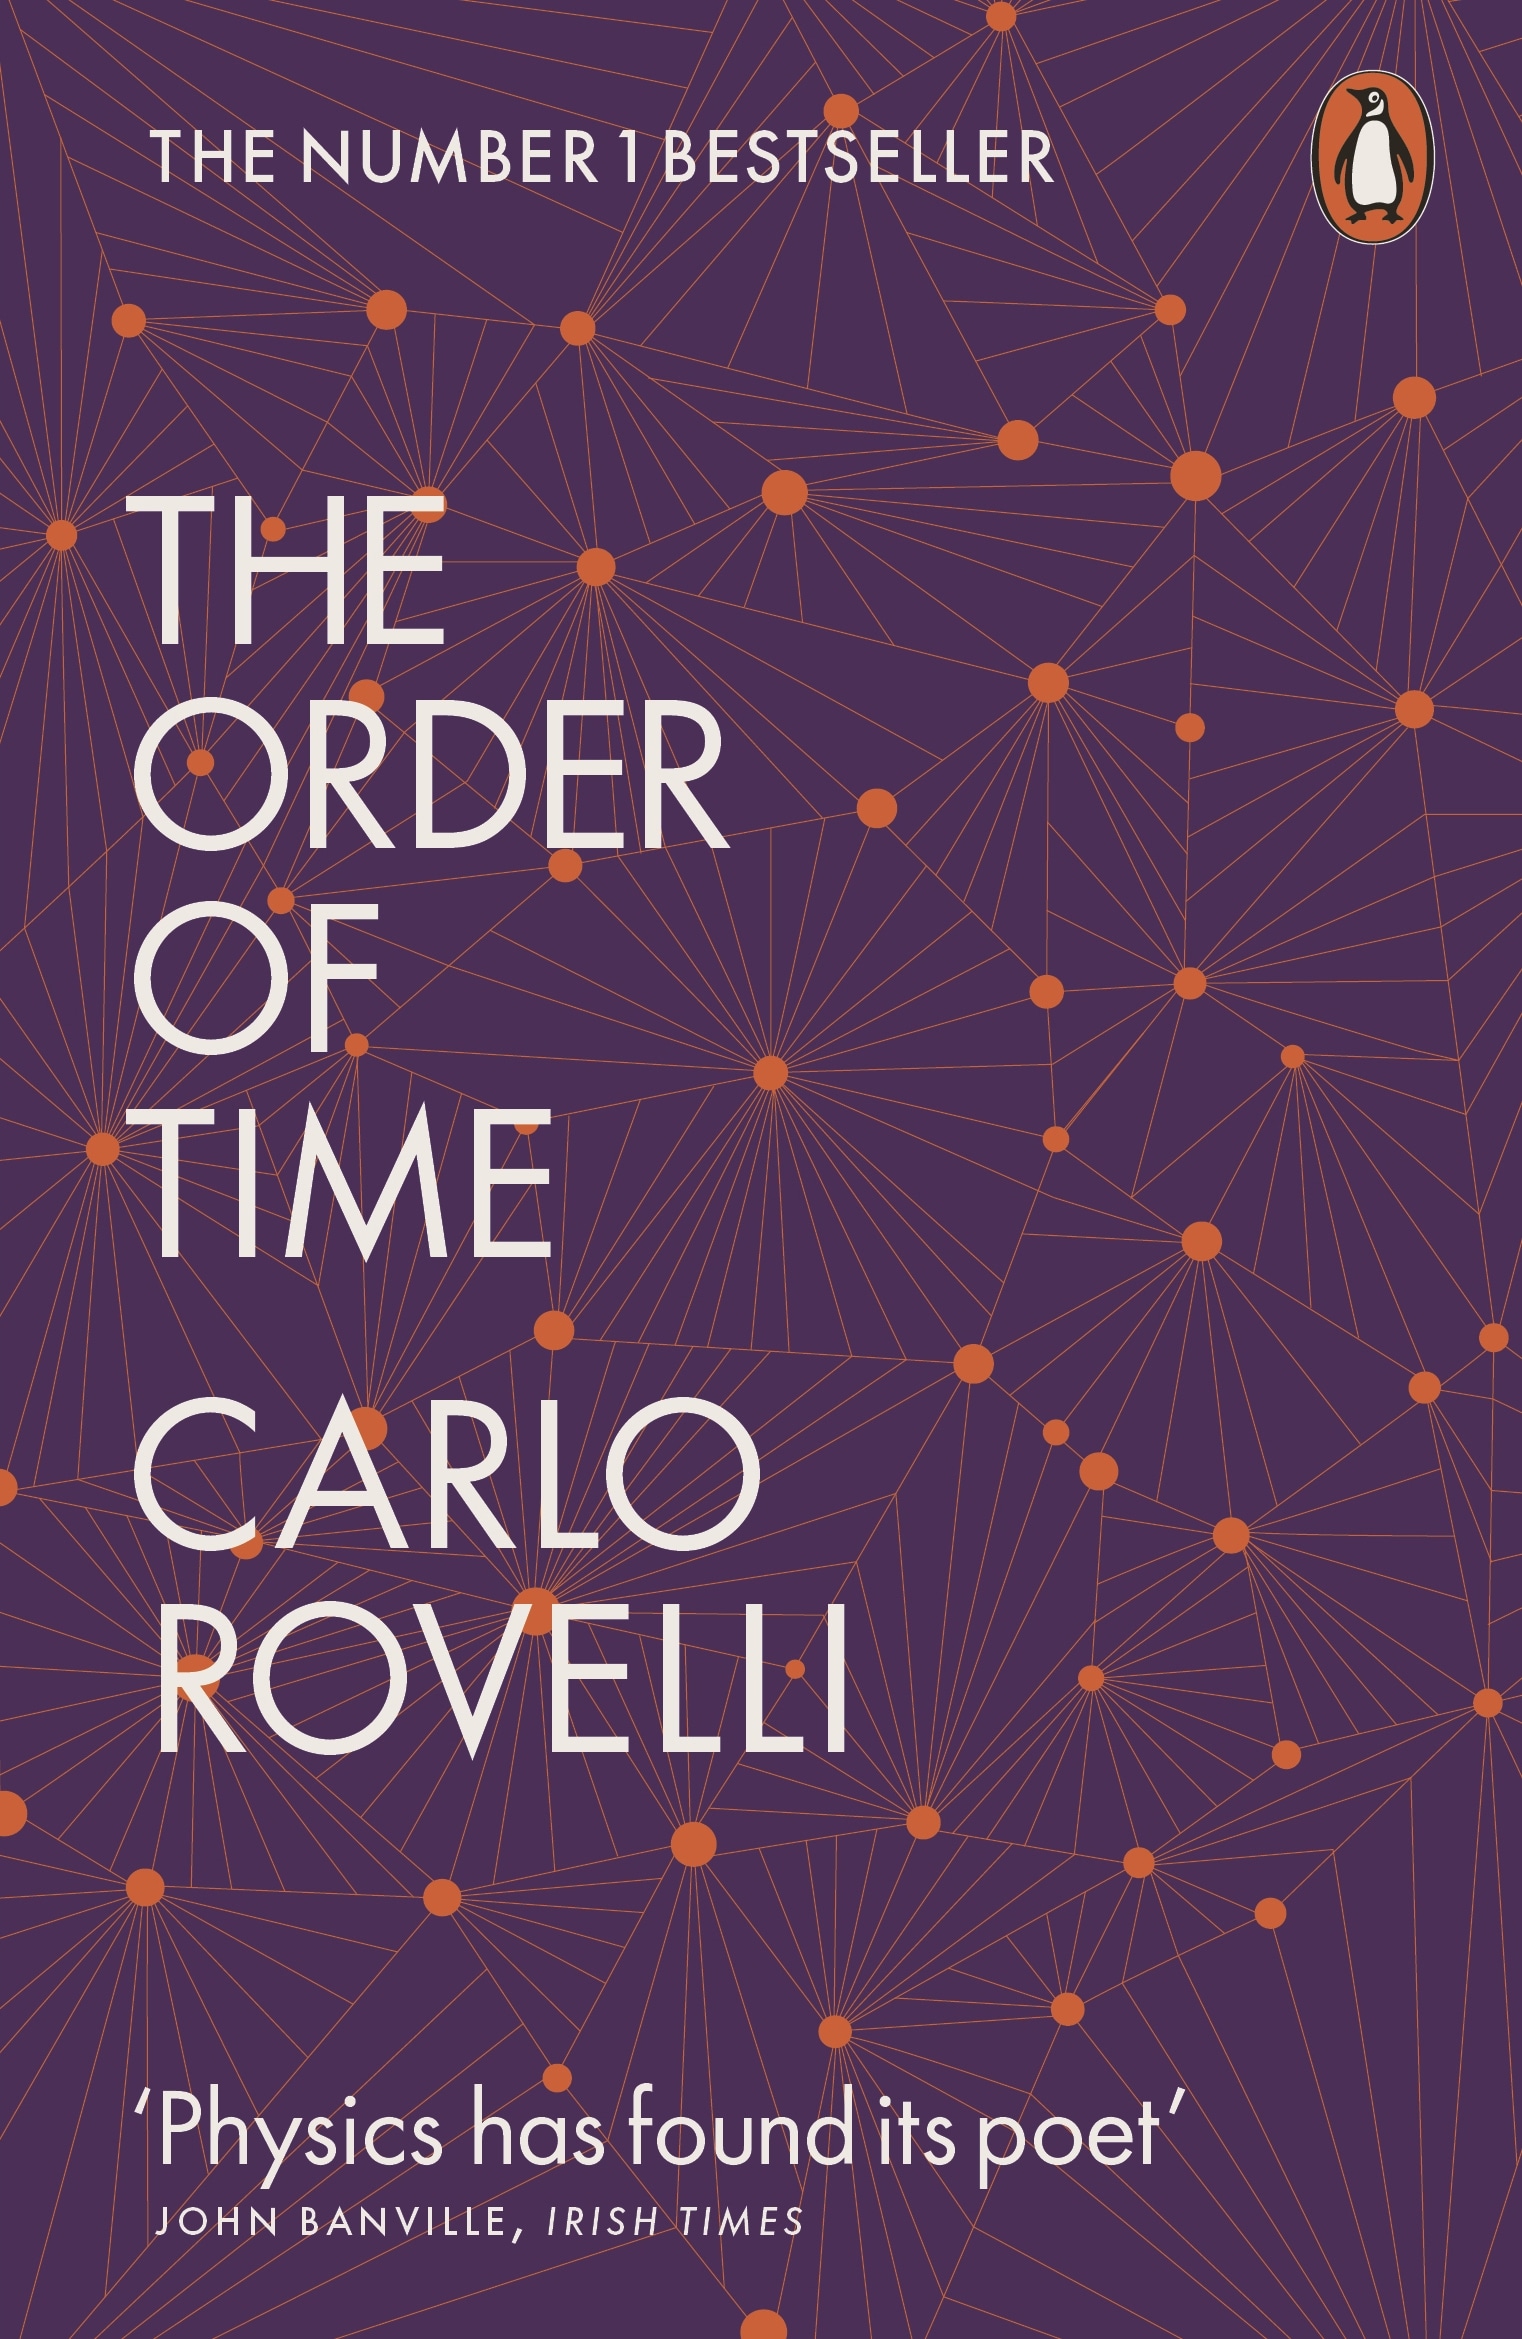 Book “The Order of Time” by Carlo Rovelli — April 4, 2019